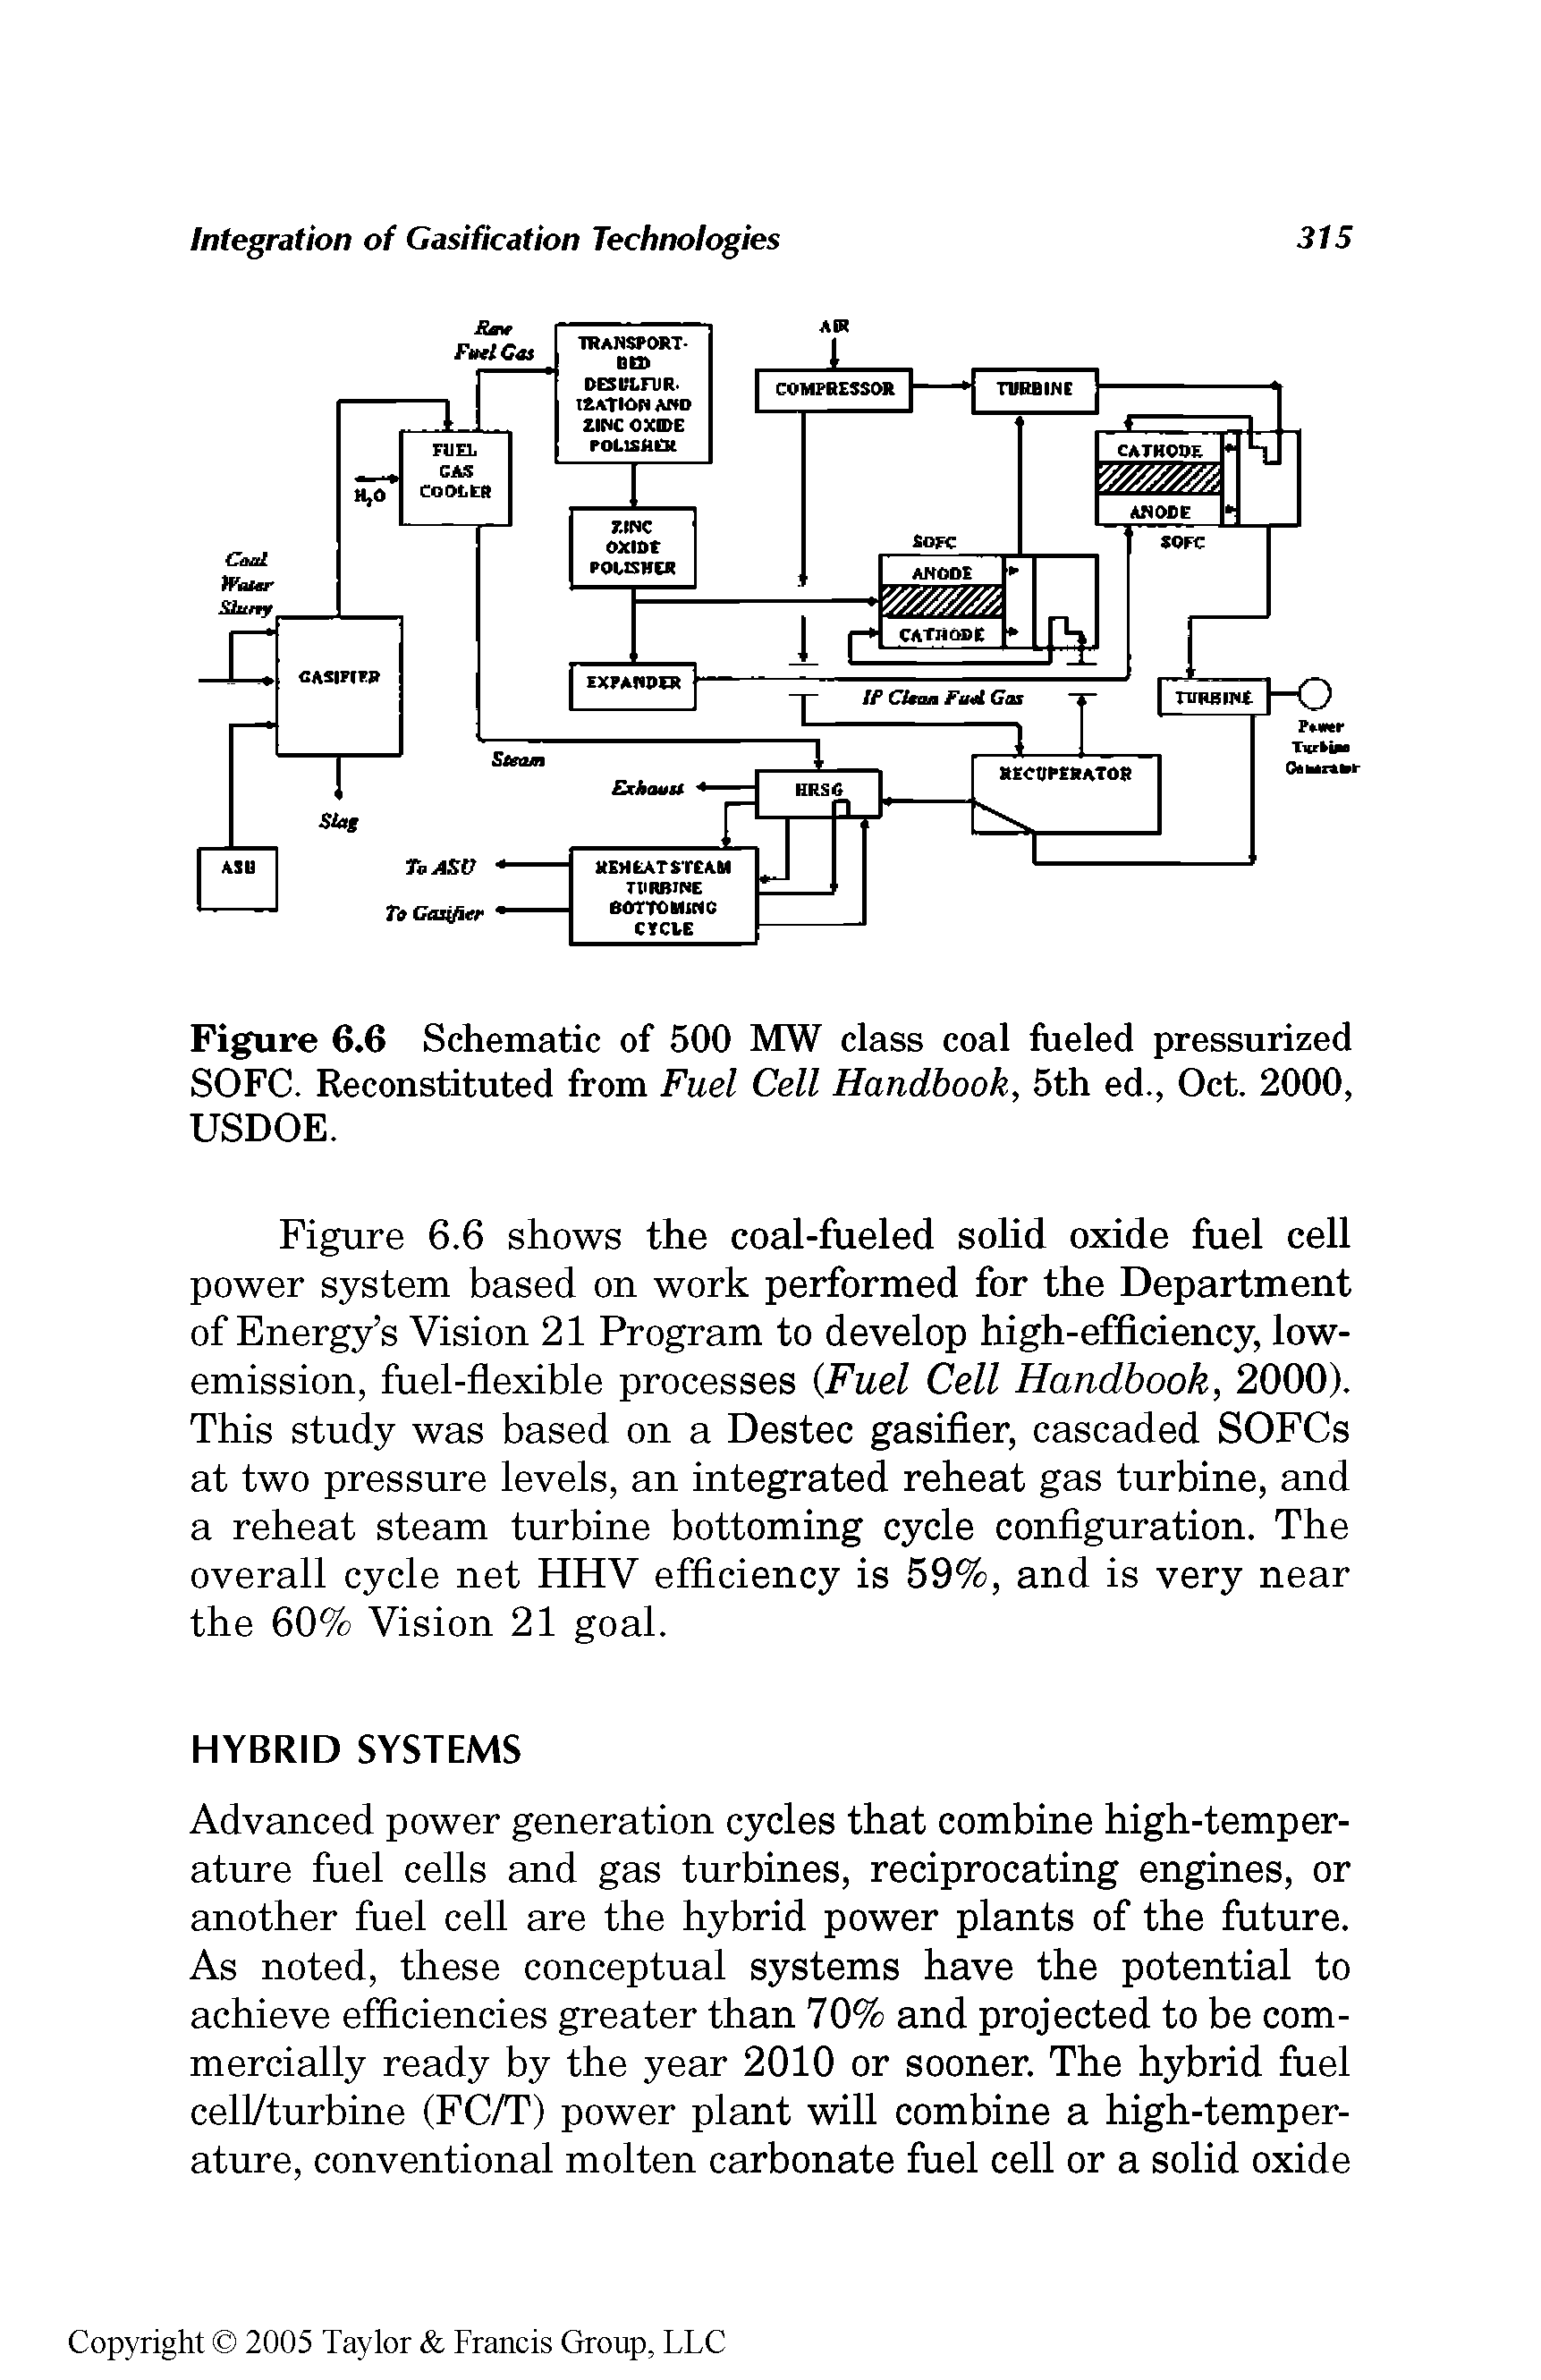 Figure 6.6 Schematic of 500 MW class coal fueled pressurized SOFC. Reconstituted from Fuel Cell Handbook, 5th ed., Oct. 2000, USDOE.